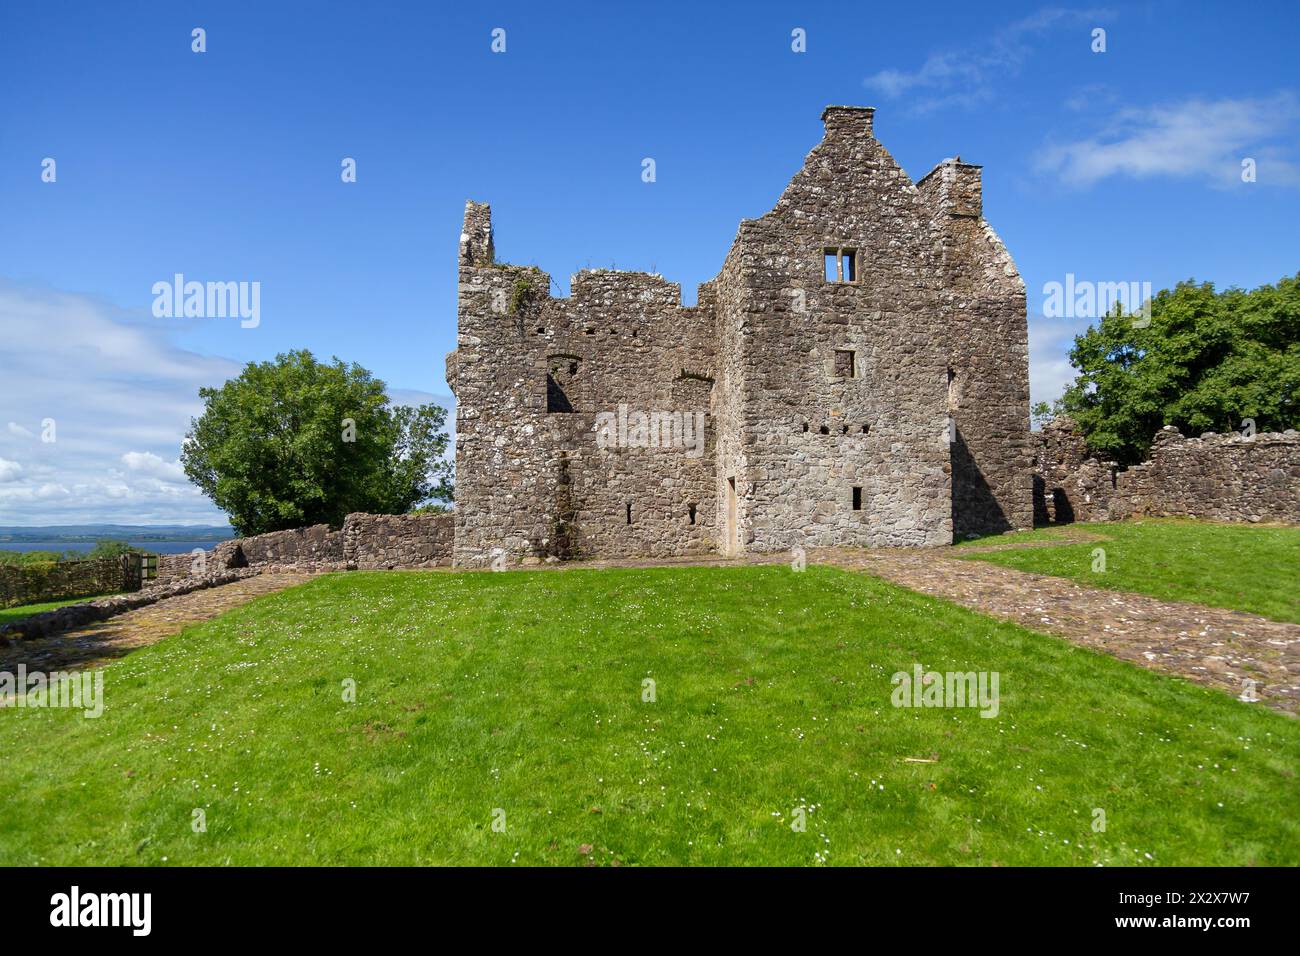 20.07.2019, Tully, Northern Ireland, United Kingdom - Tully Castle ruins, built for Ulster Scotsman Sir John Hume 1612-1615 and burnt down in 1641, no Stock Photo